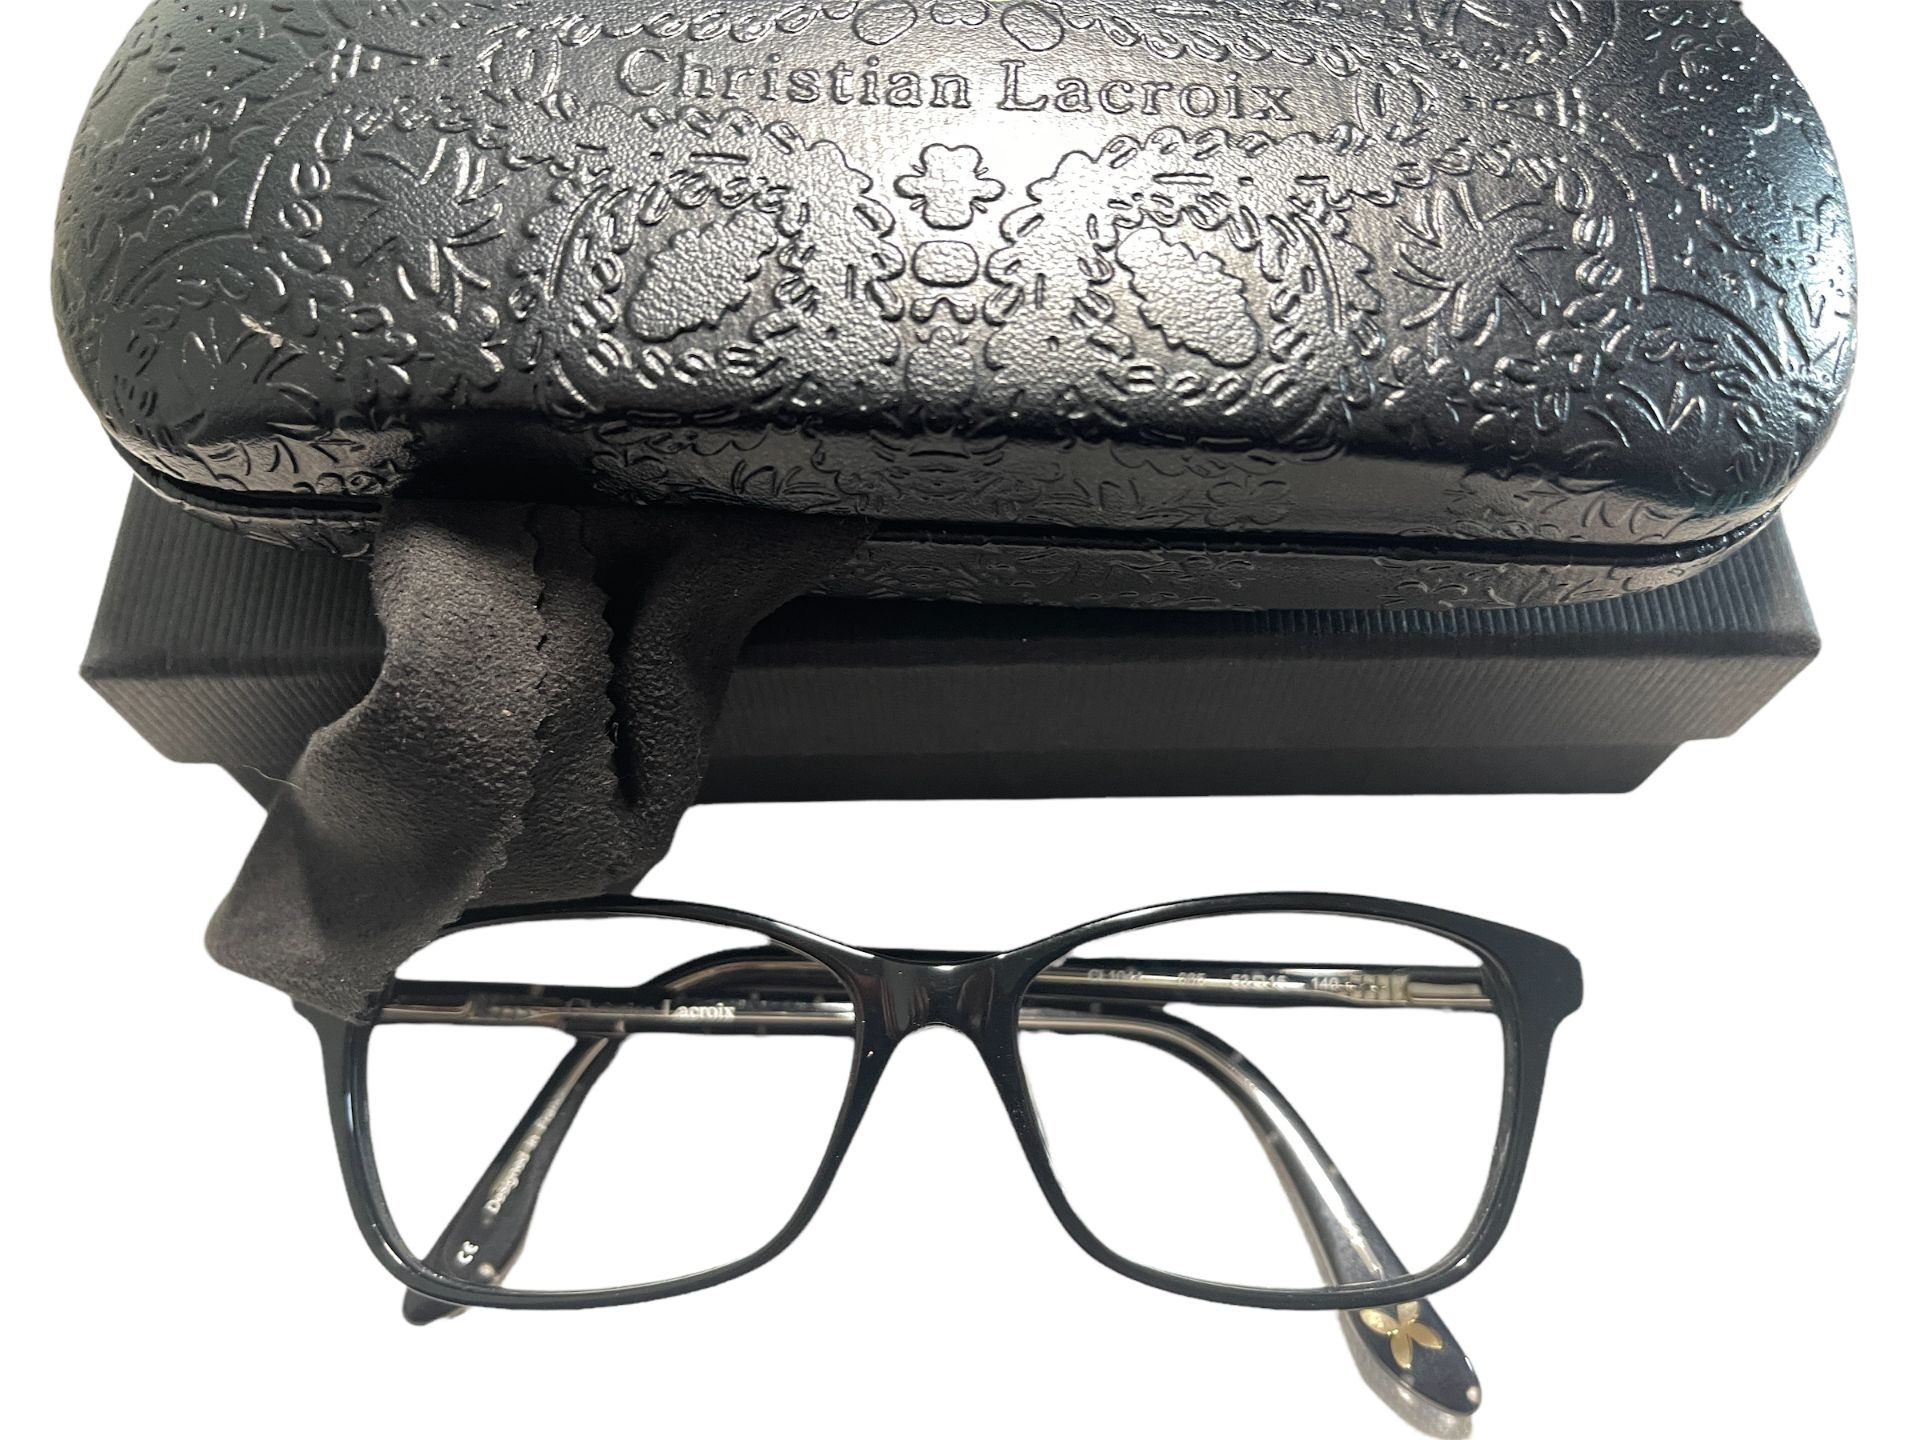 Christian Lacroix Spectacle Frames - Ex Demo or Surplus Stock from our Private Jet Charter - Image 5 of 7